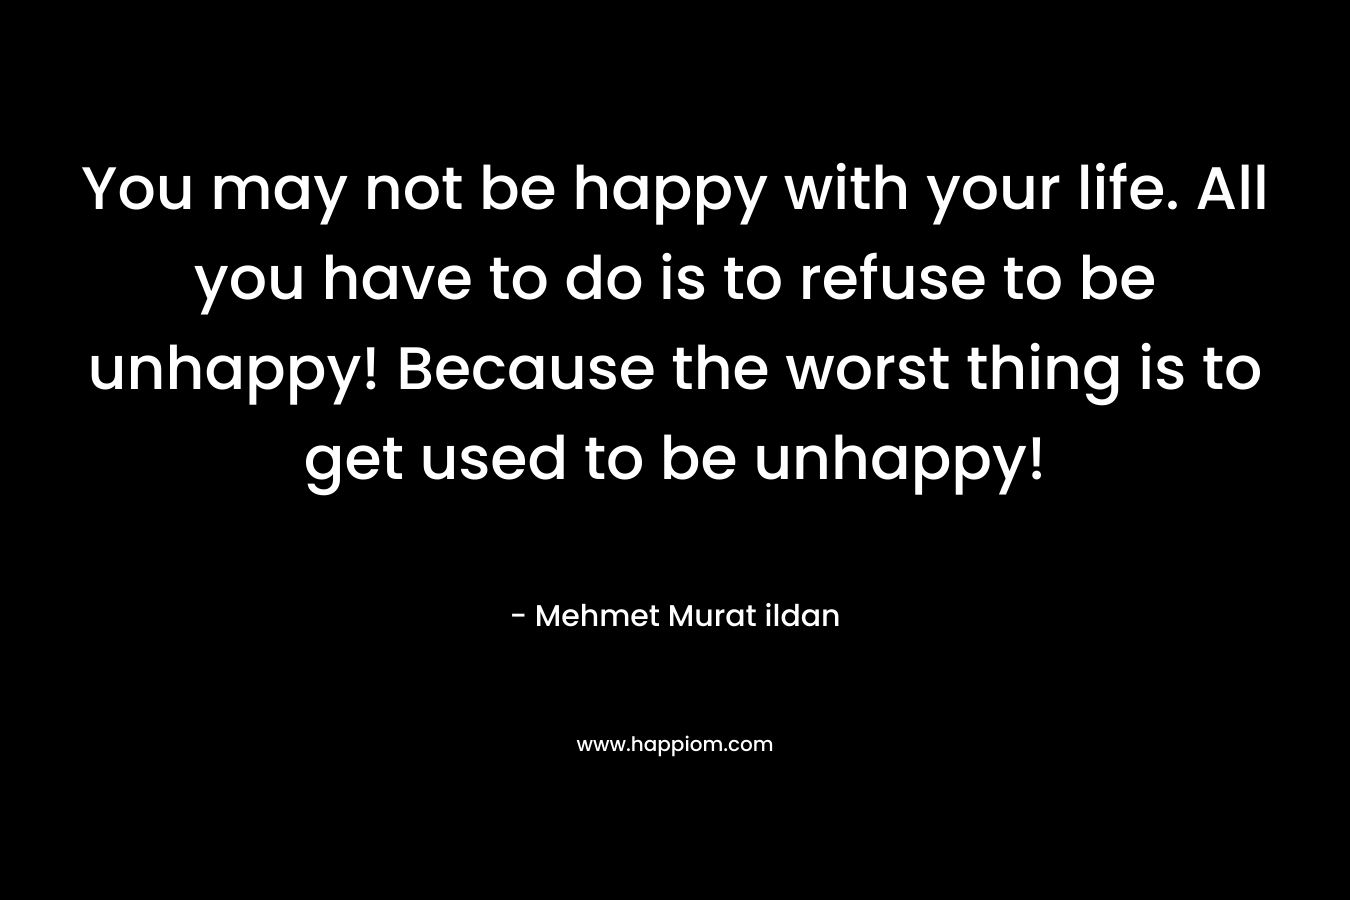 You may not be happy with your life. All you have to do is to refuse to be unhappy! Because the worst thing is to get used to be unhappy! – Mehmet Murat ildan